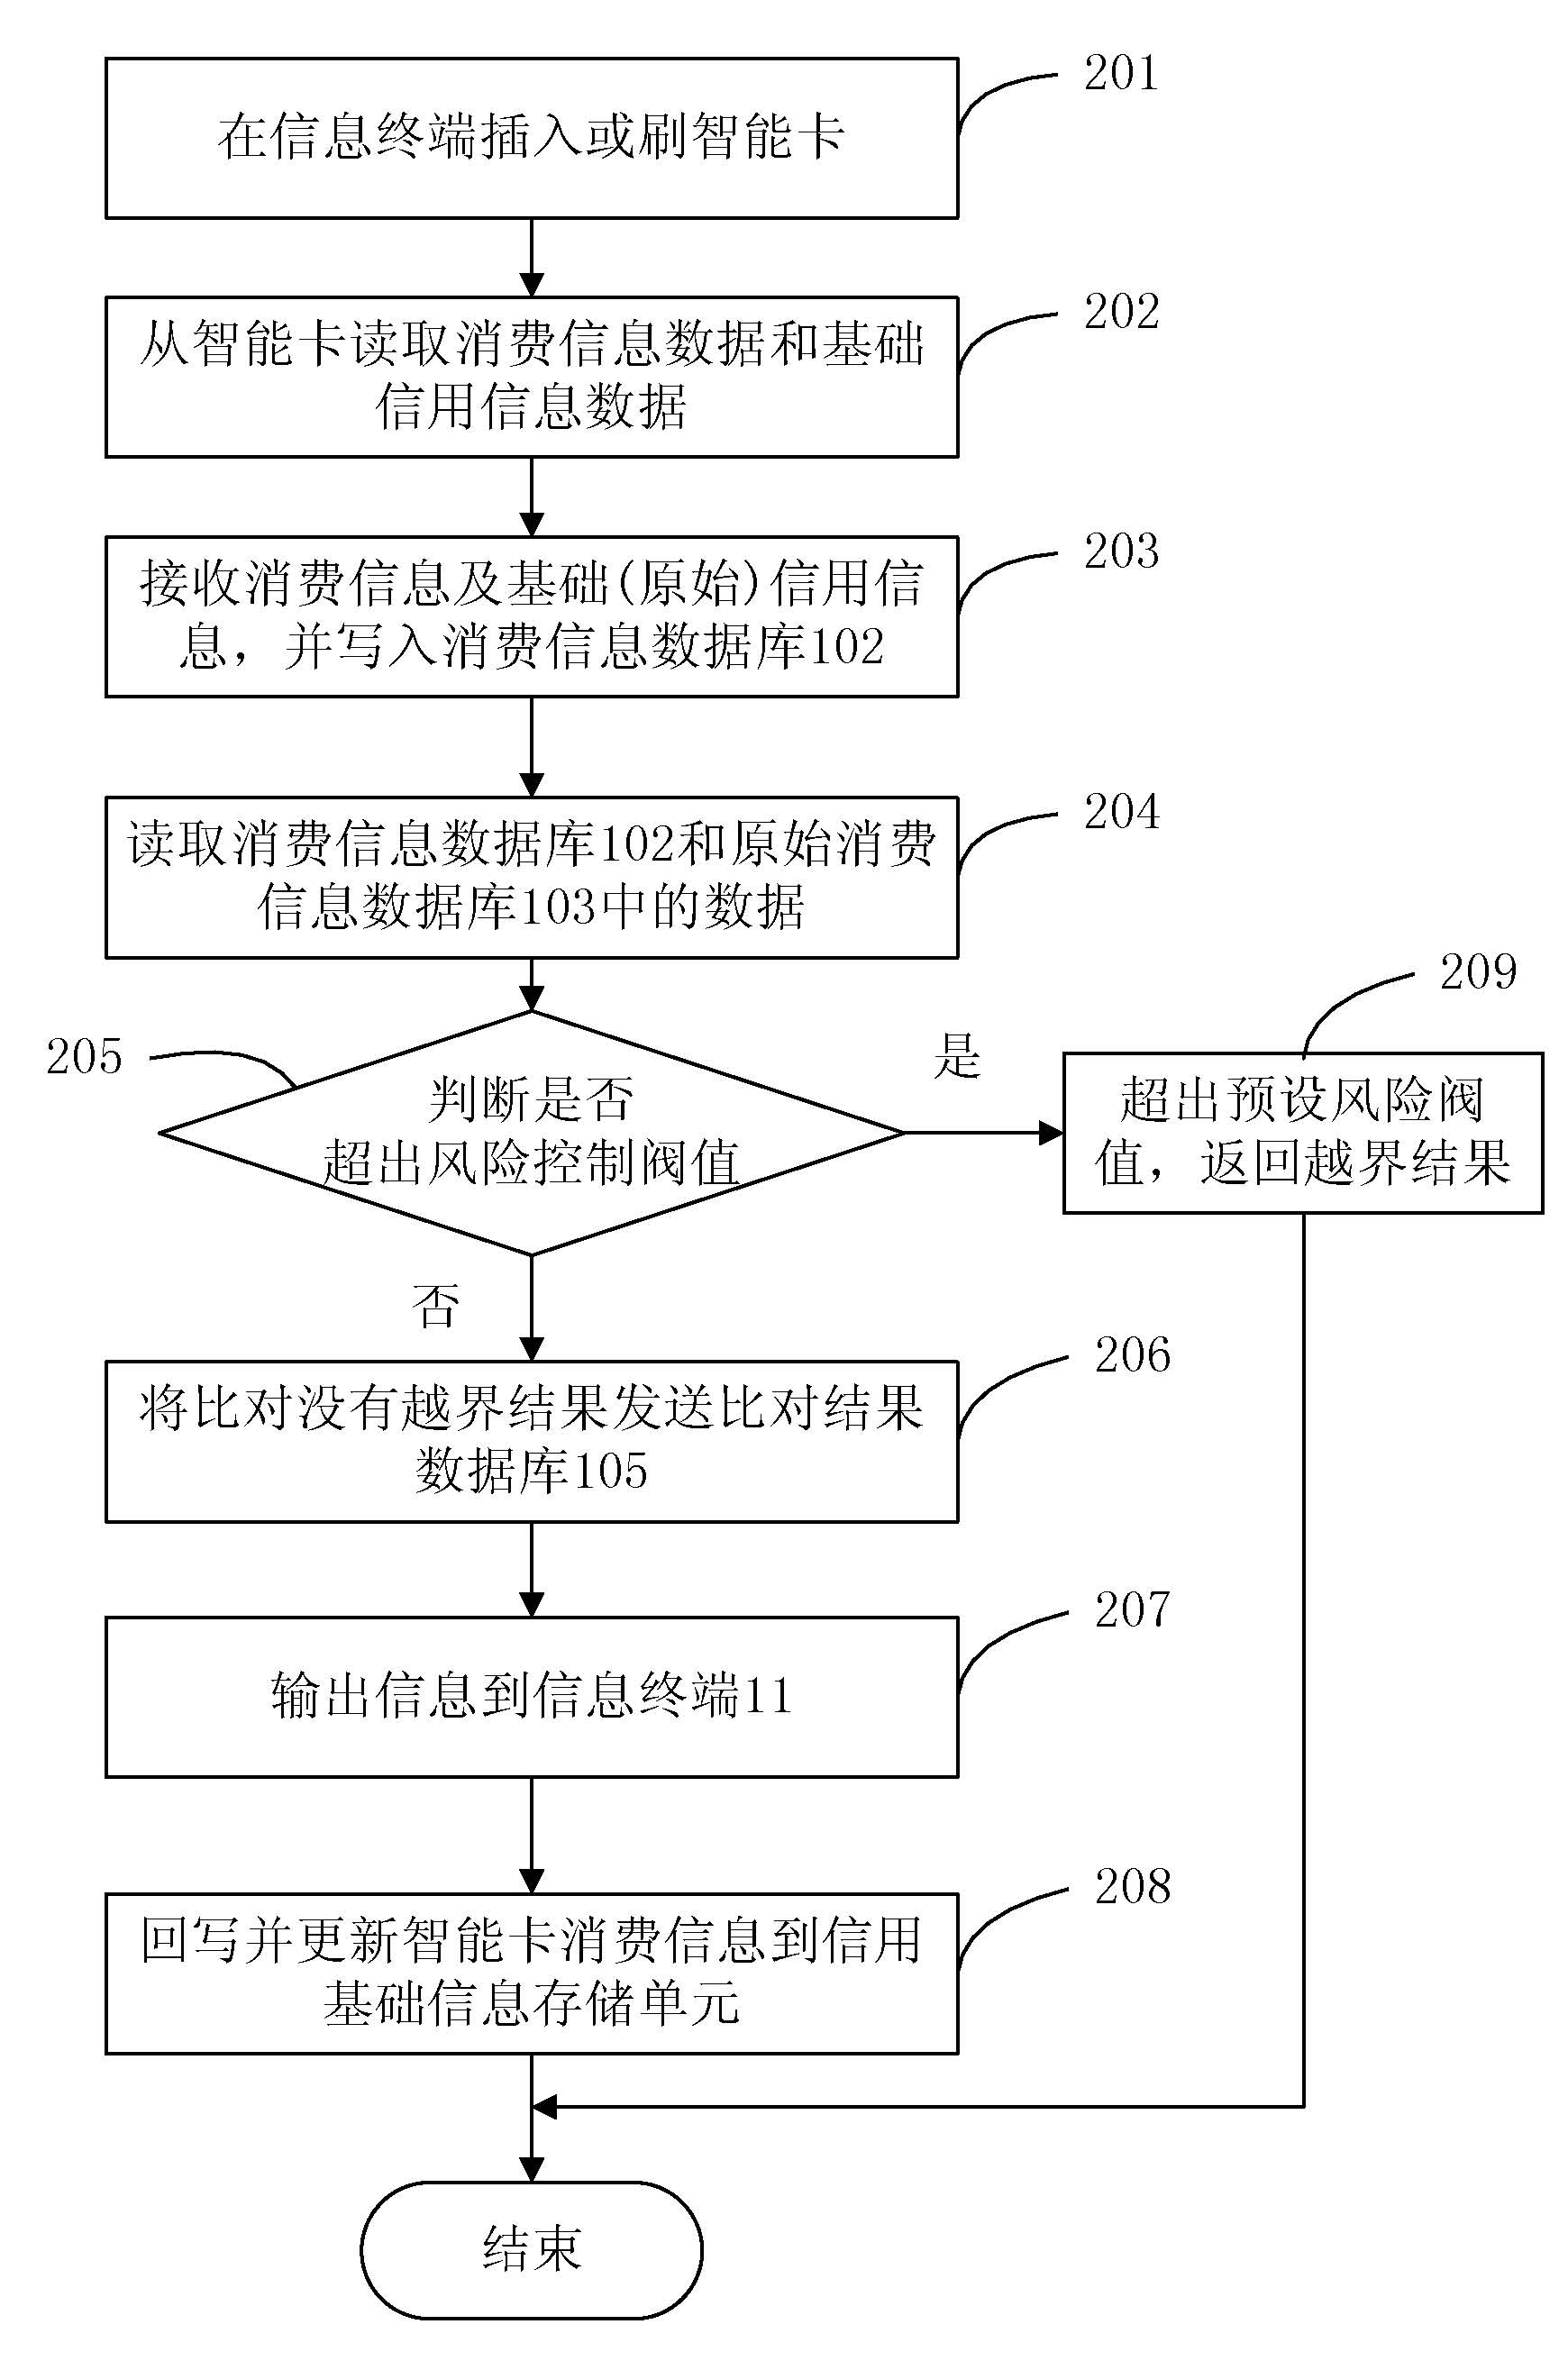 System and method for processing consumption credit investigation information